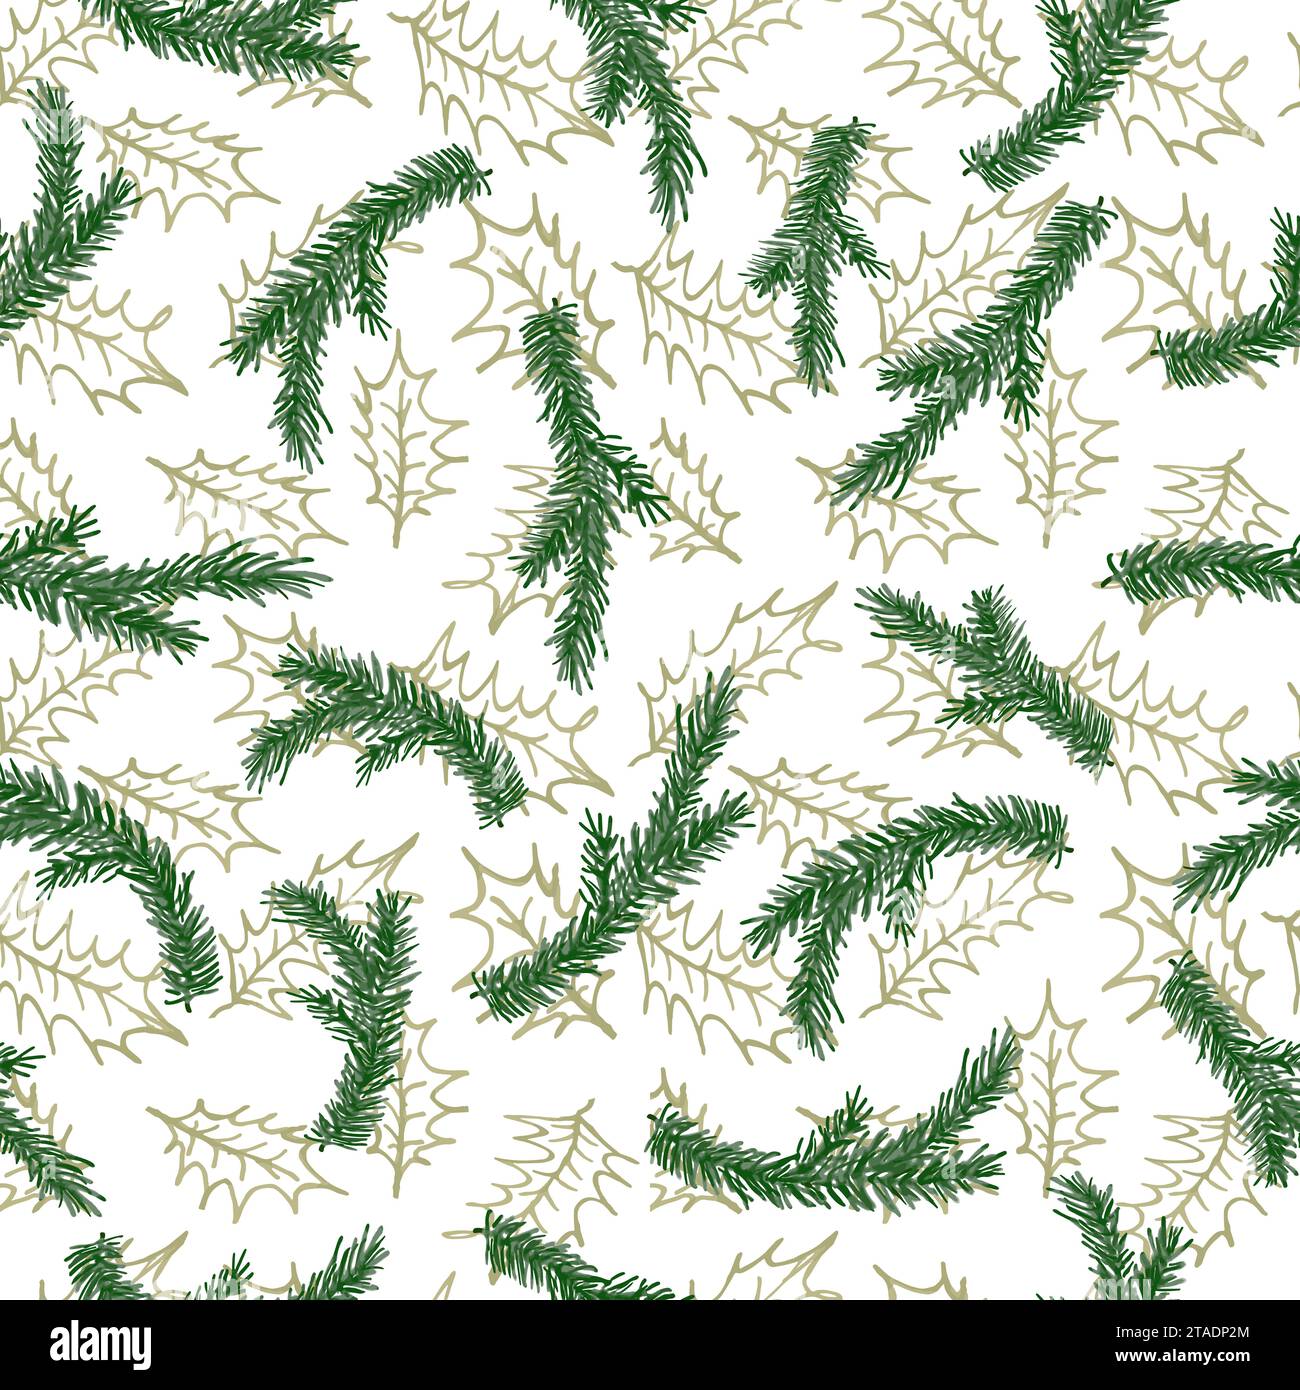 Watercolor seamless pattern with green pine branches and gold holly leaves. Sprig of pine hand drawn for wrapping paper, winter holiday decoration,gre Stock Vector